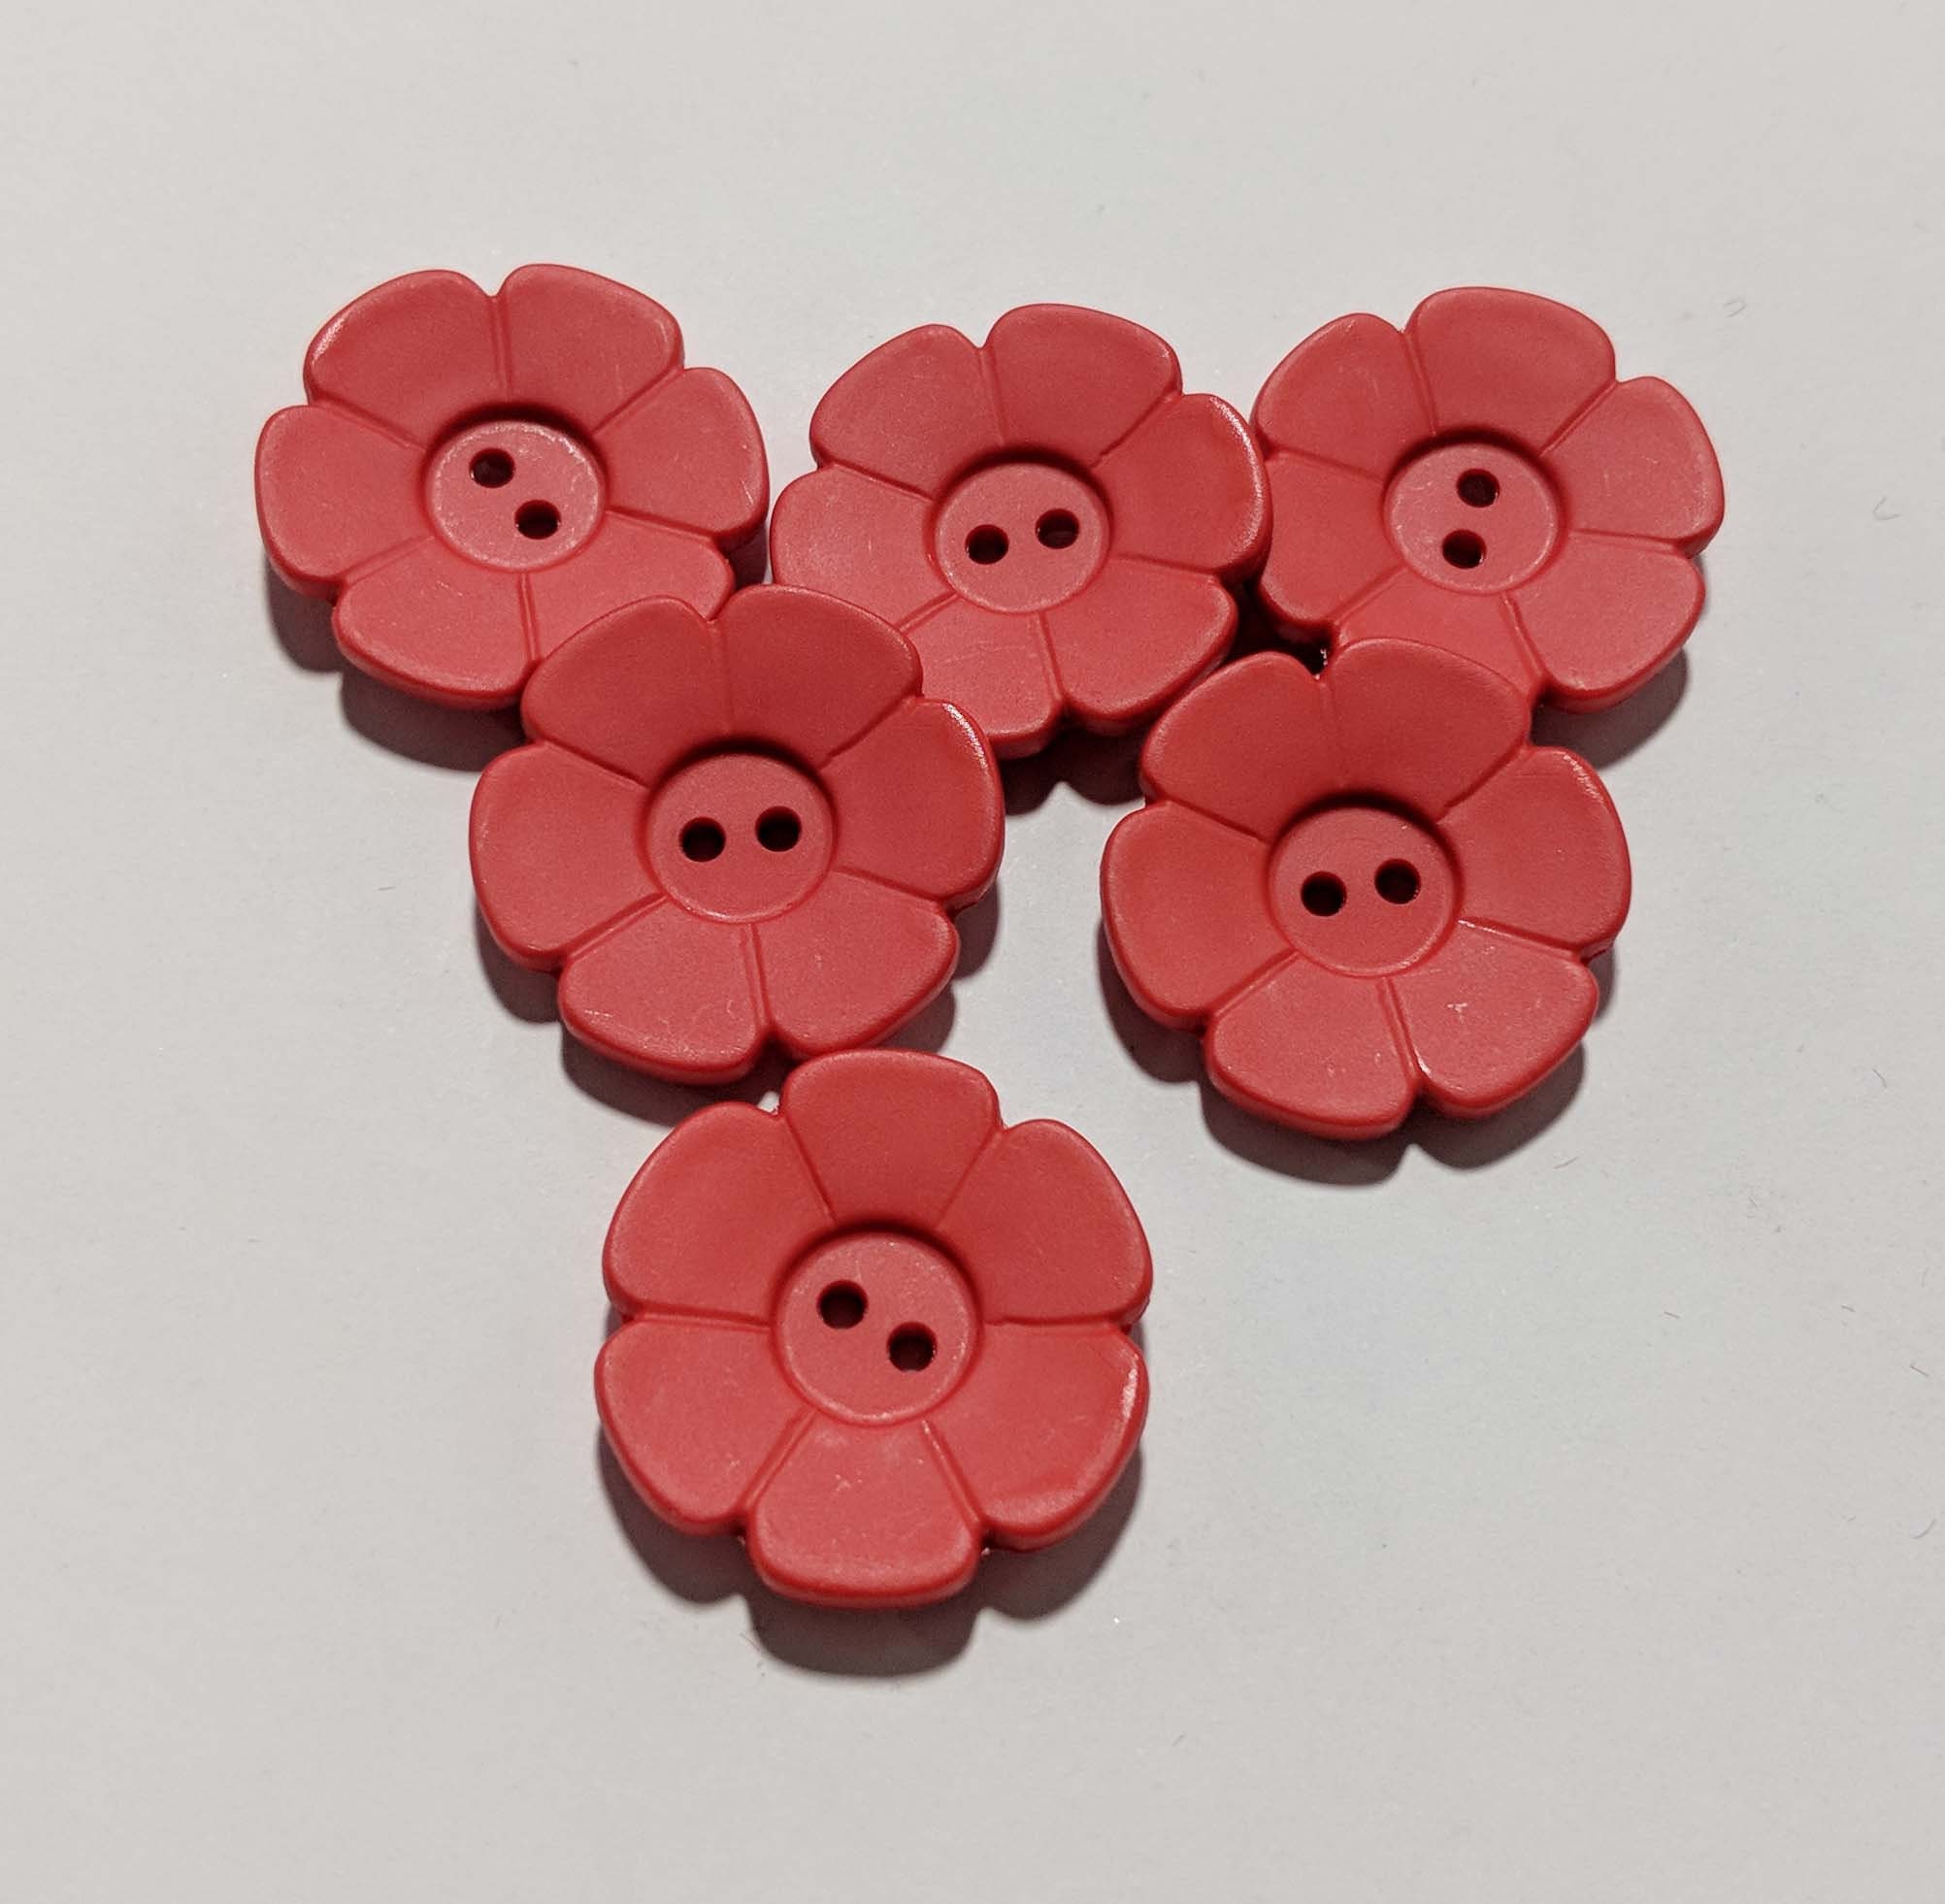 Flower button - Size: 28mm - Color: red - Art.No. 340708